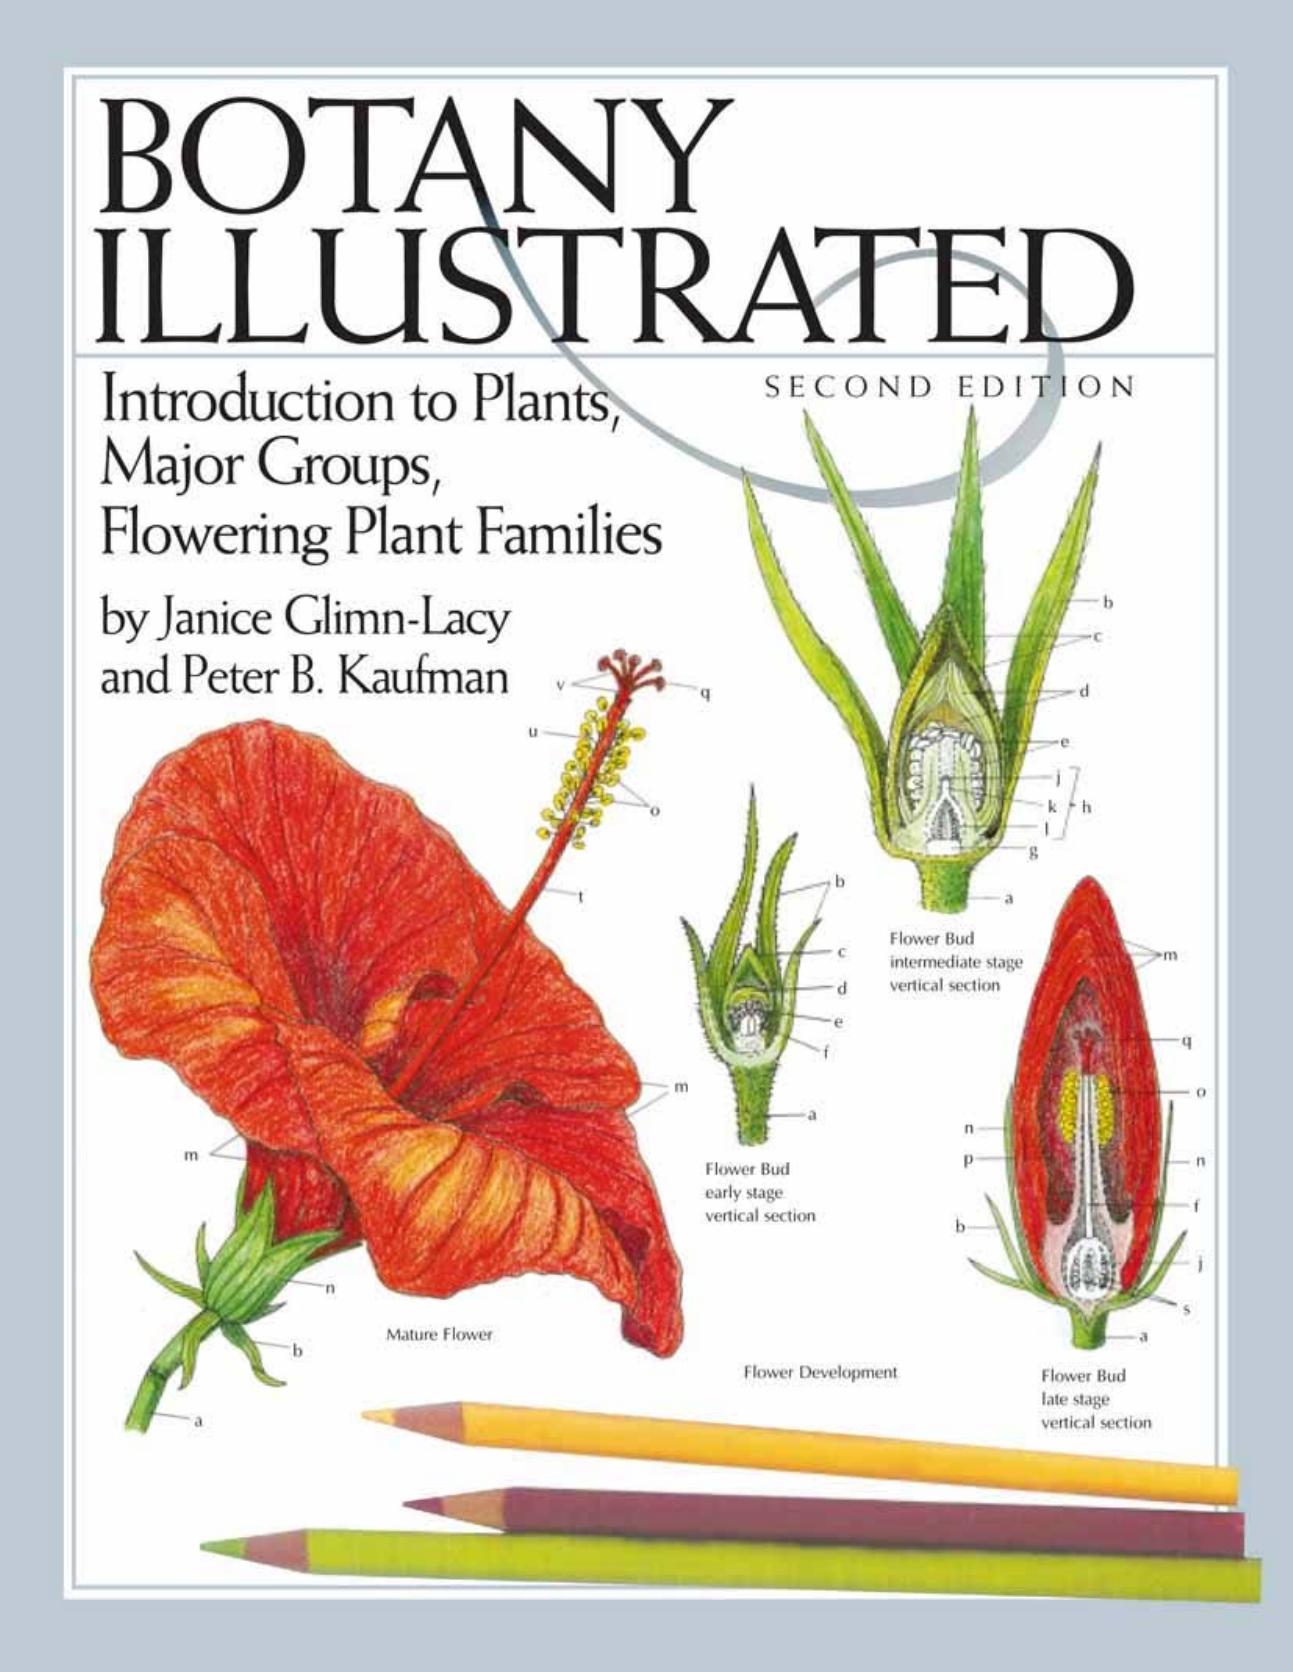 Botany Illustrated  Introduction to Plants, Major Groups, Flowering Plant Families 2006